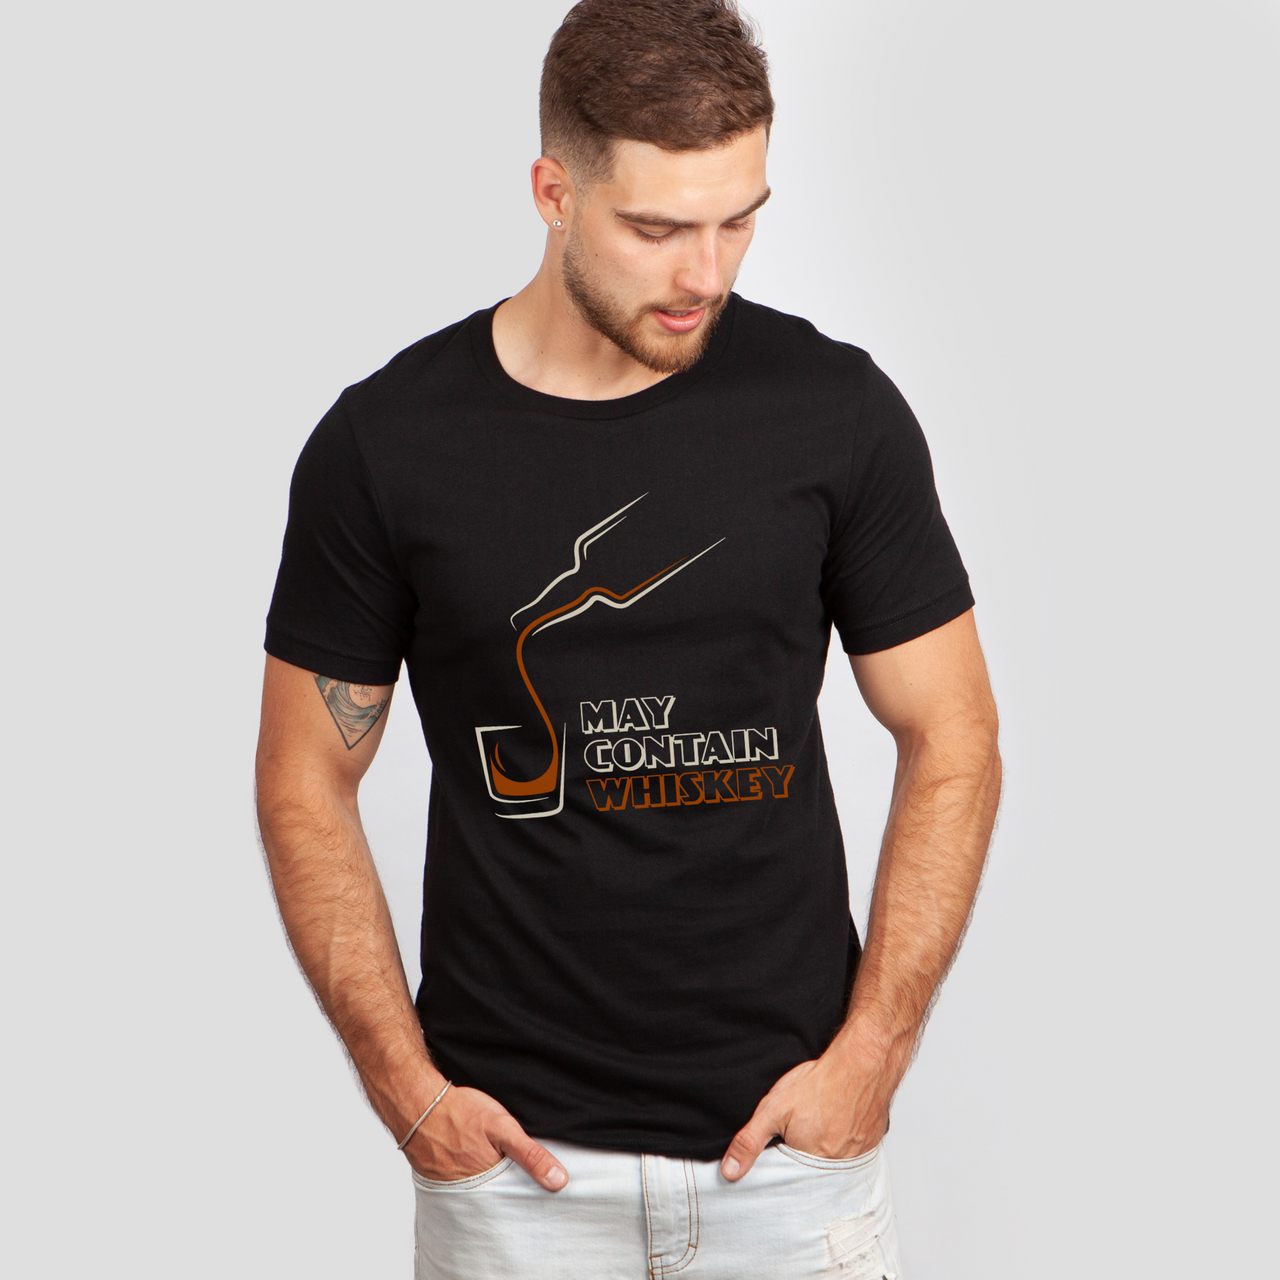 may contain pour whiskey glass colored black shirt